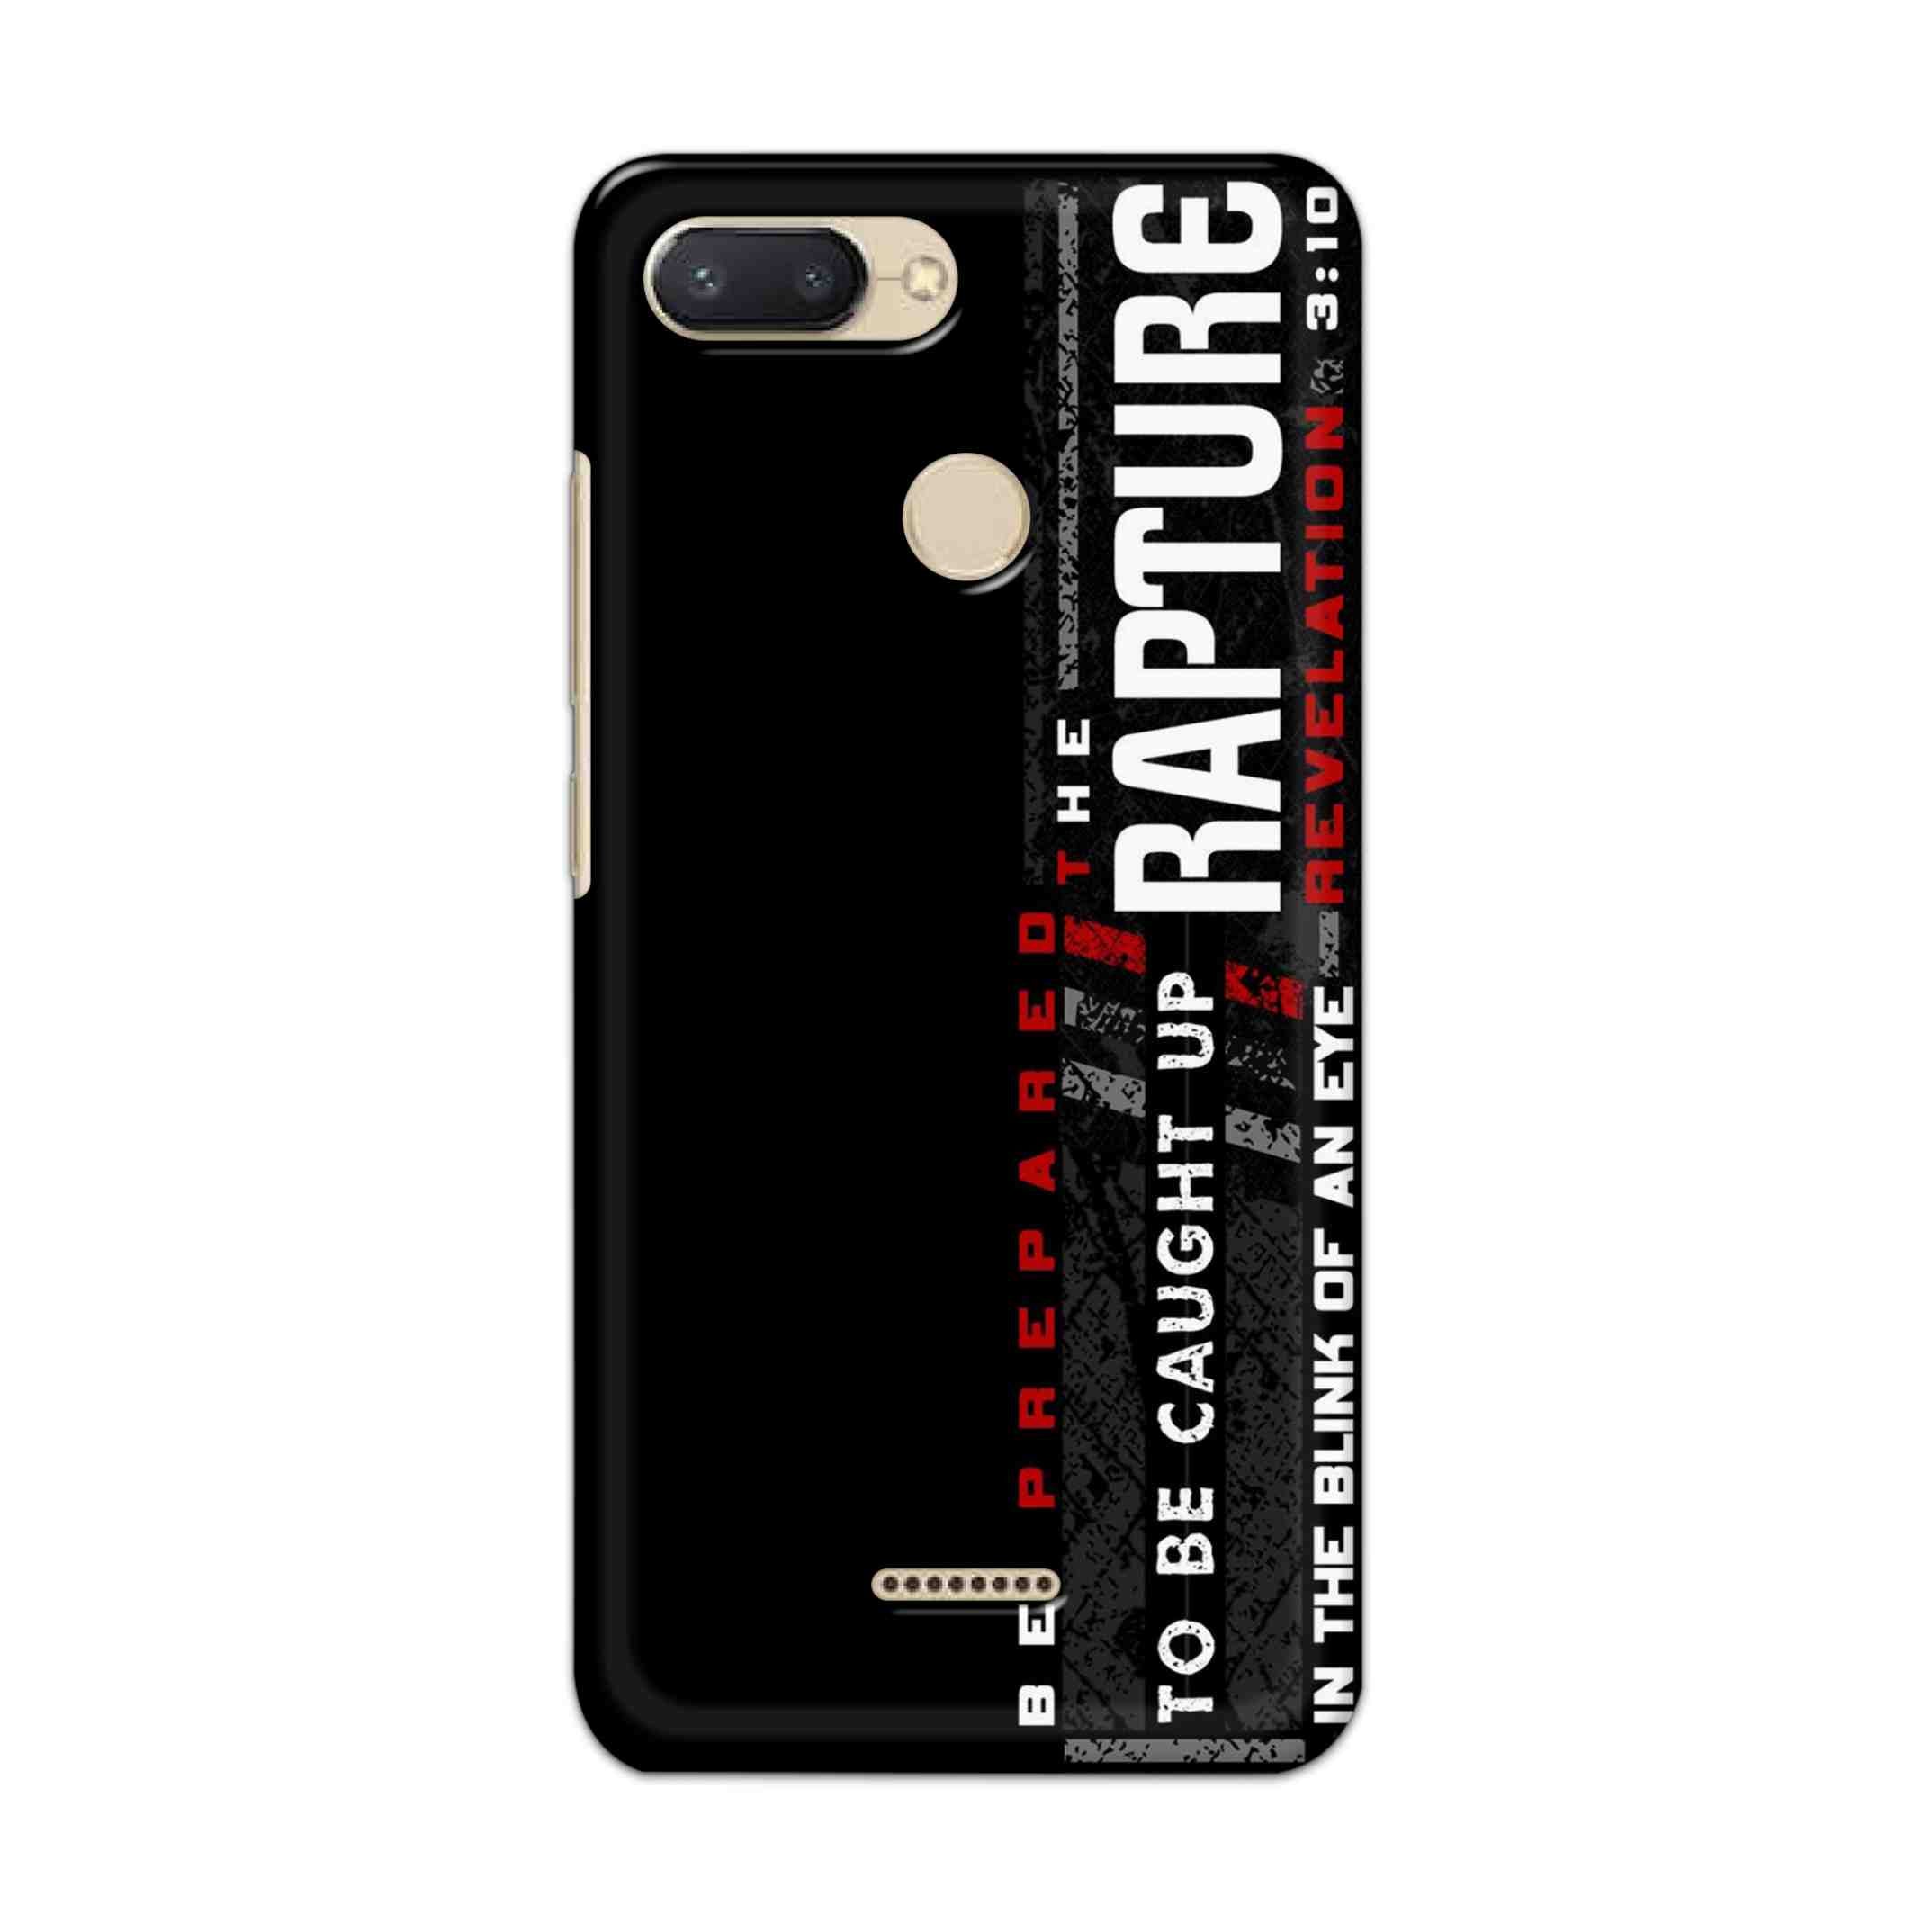 Buy Rapture Hard Back Mobile Phone Case/Cover For Xiaomi Redmi 6 Online